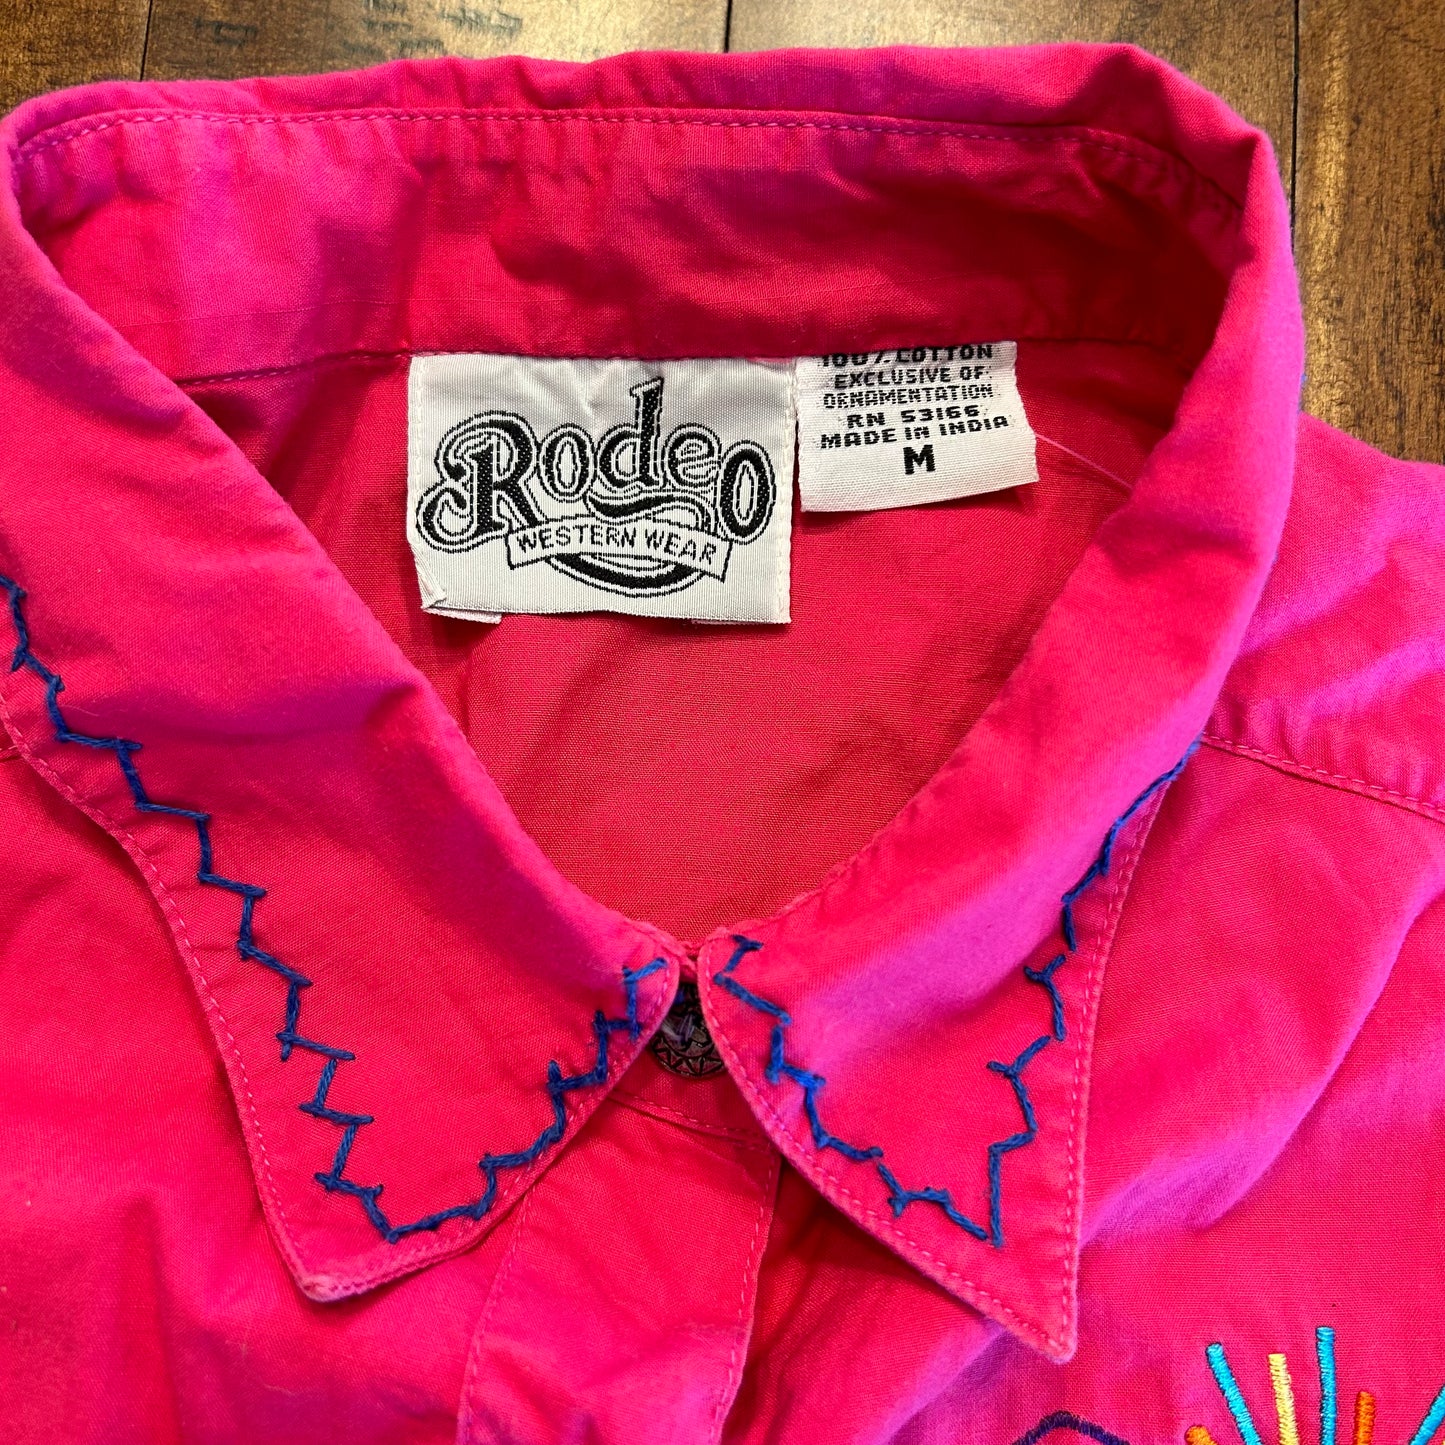 Vintage Rodeo Western Wear Barbie Pink Tank Top Button Up with Tie Size M